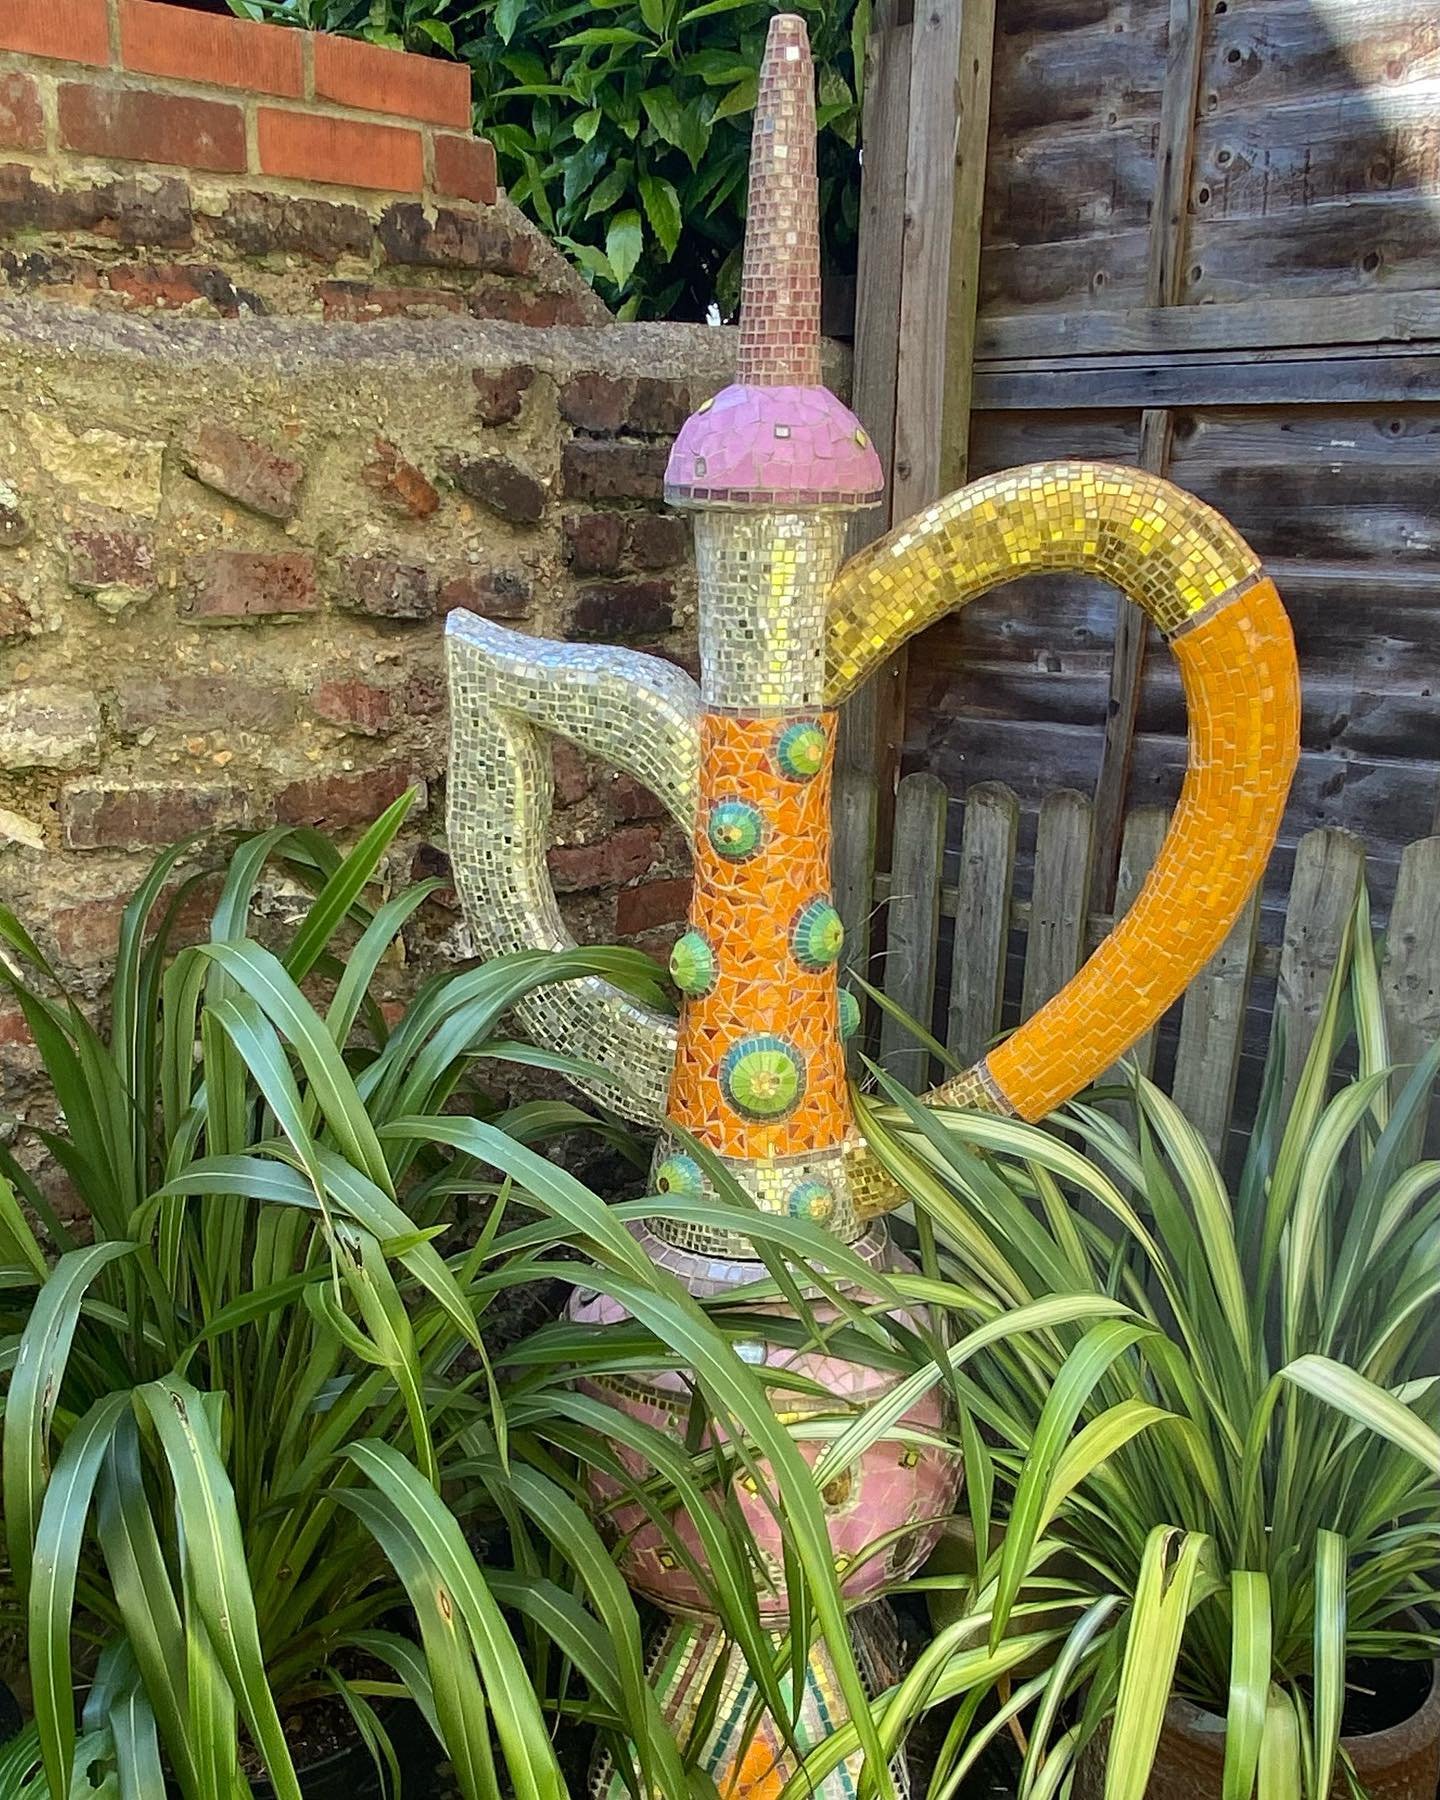 Delighted to be exhibiting with a selection of beautifully eclectic work @katherinerichardsgallery for the @artistsopenhouses here in Hove.

Open today 10.39 to 4.30 and next weekend too. 

I have large sculptures in the lovely patio garden along wit